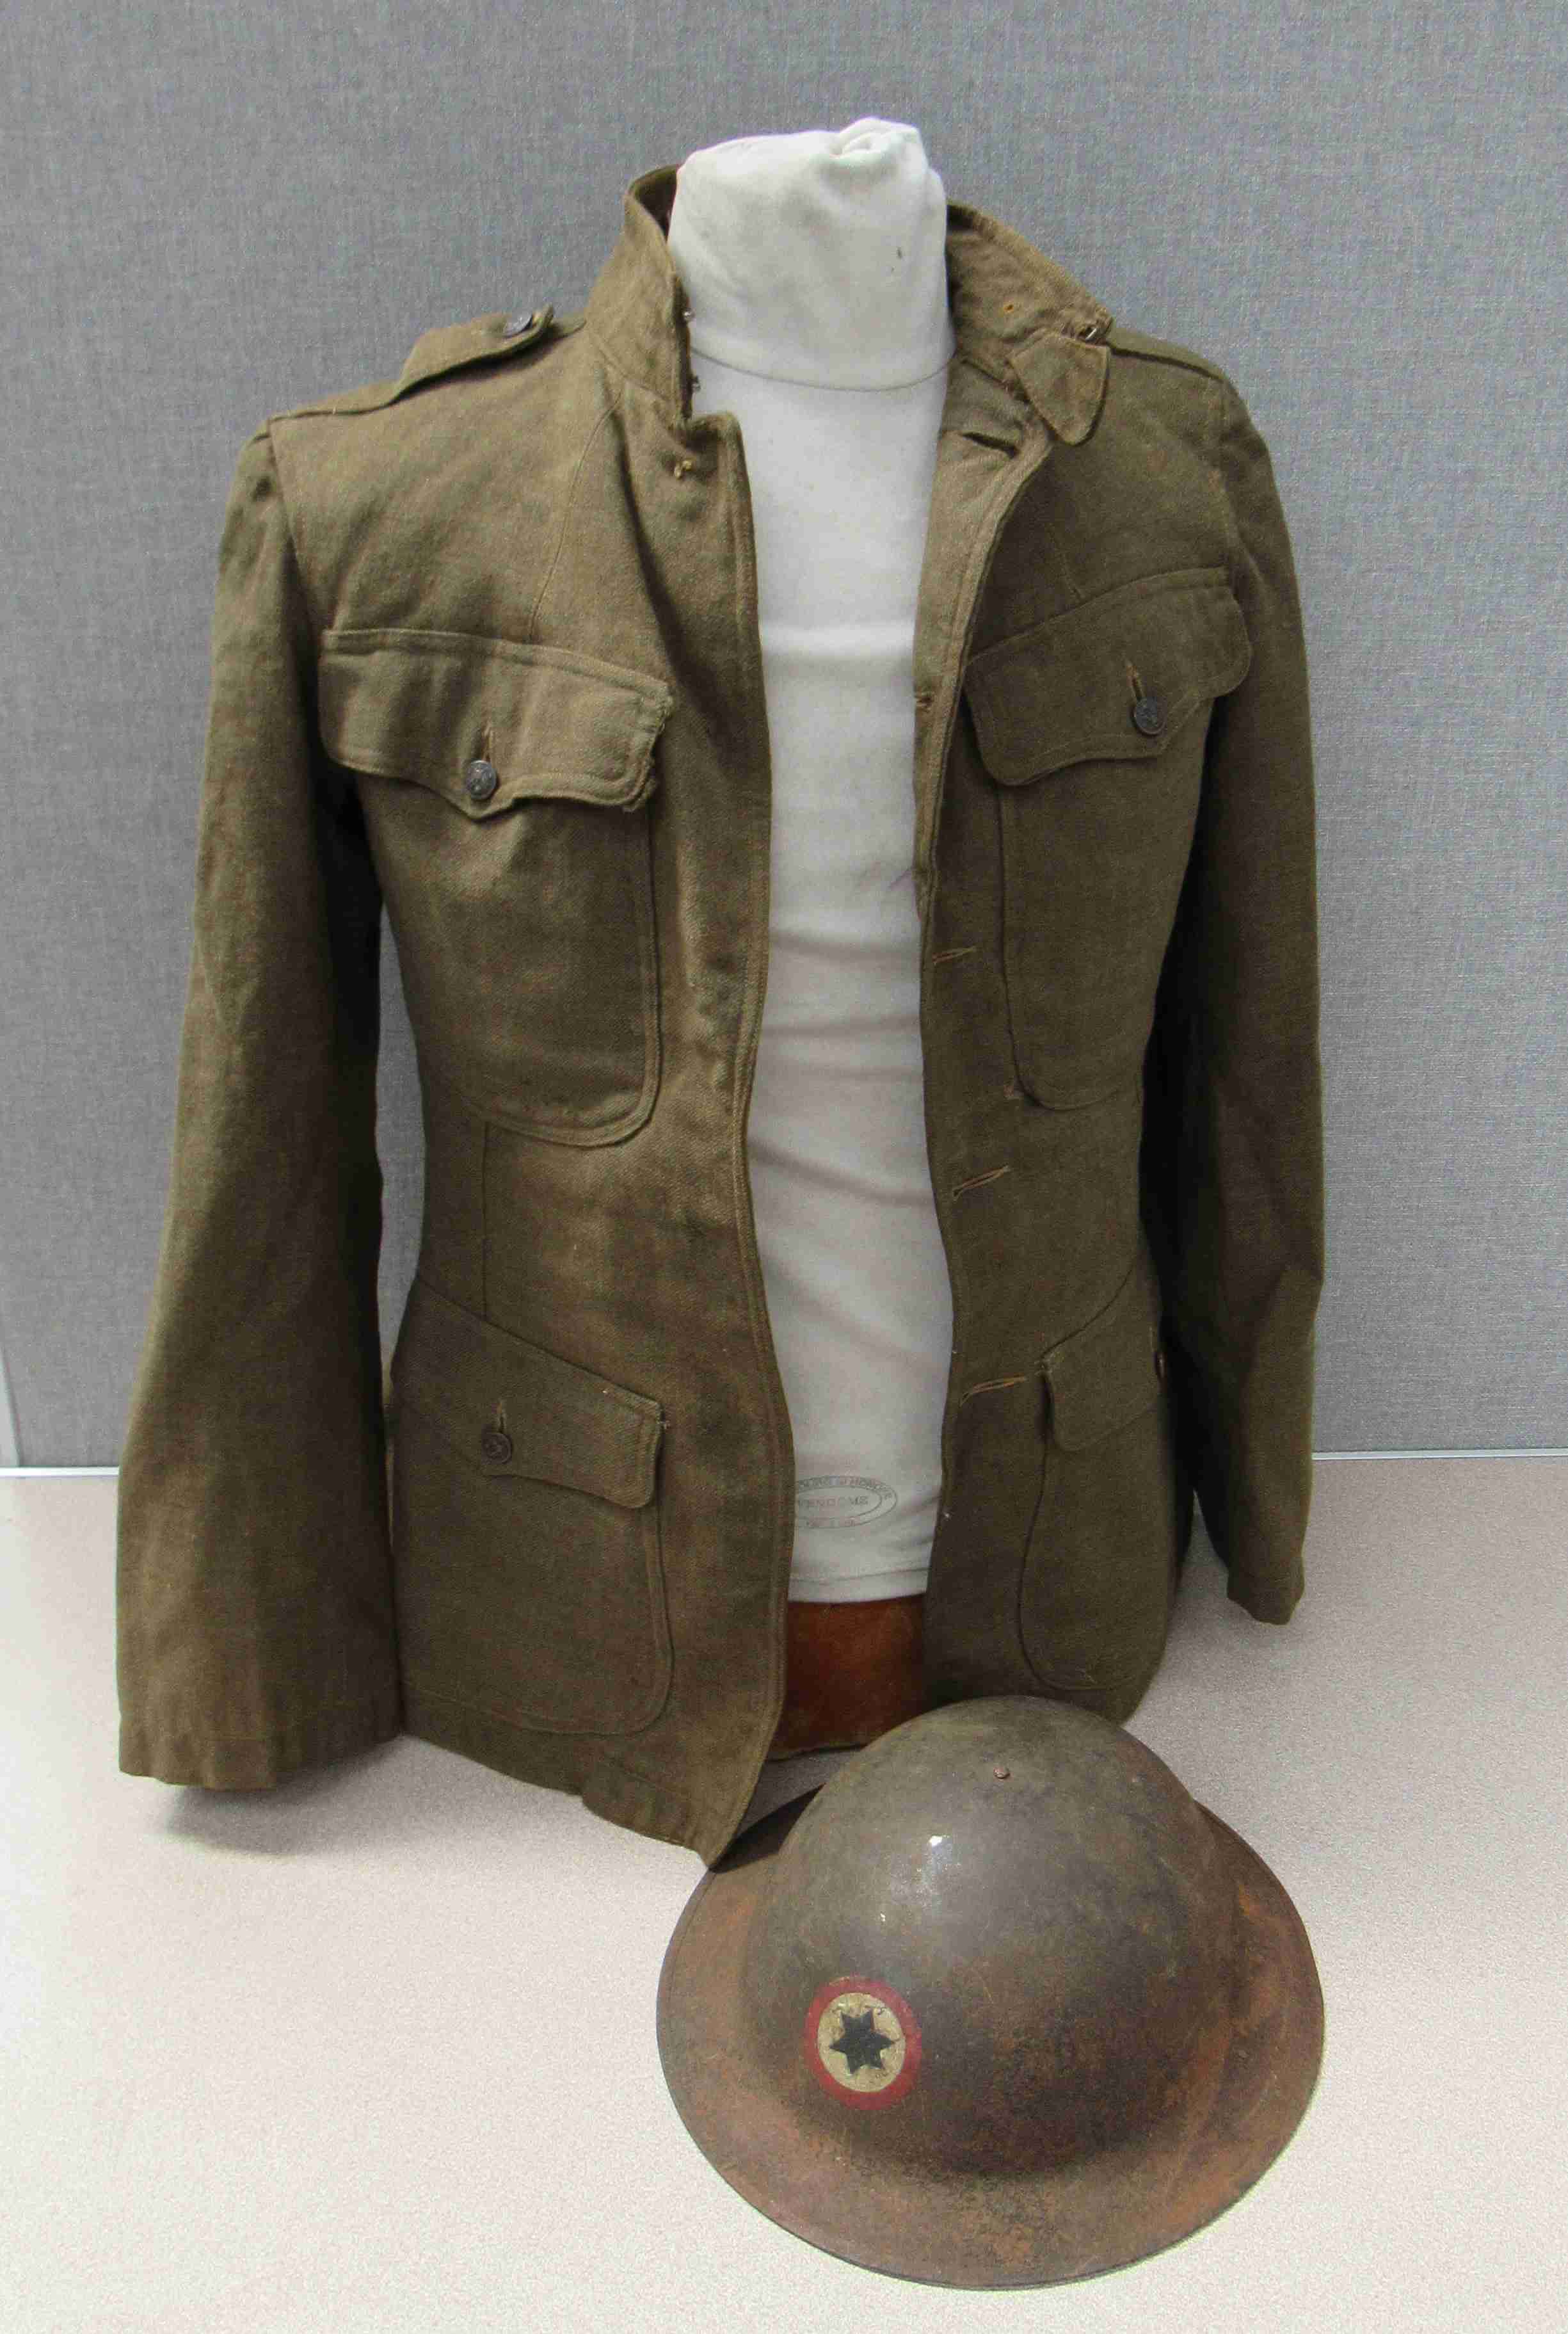 A WWI US soldier's service jacket with US Army insignia and US Army Brodie helmet with division